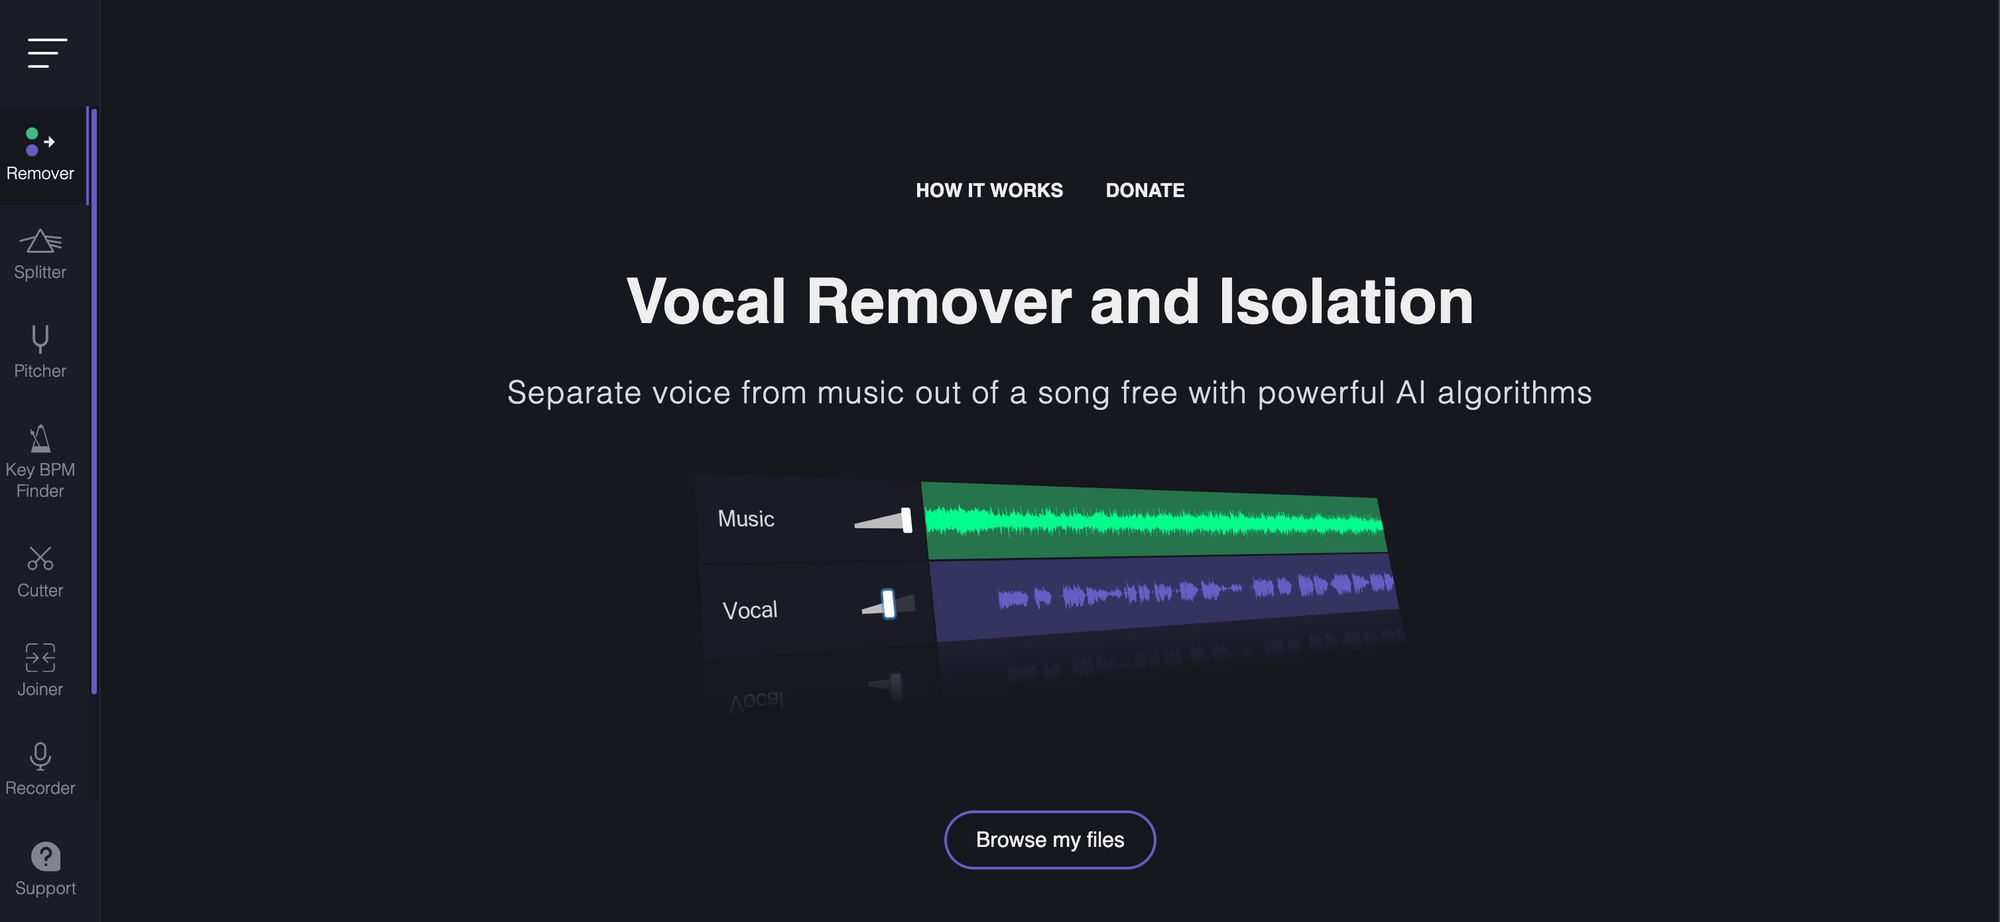 Vocal Remover Landing Page